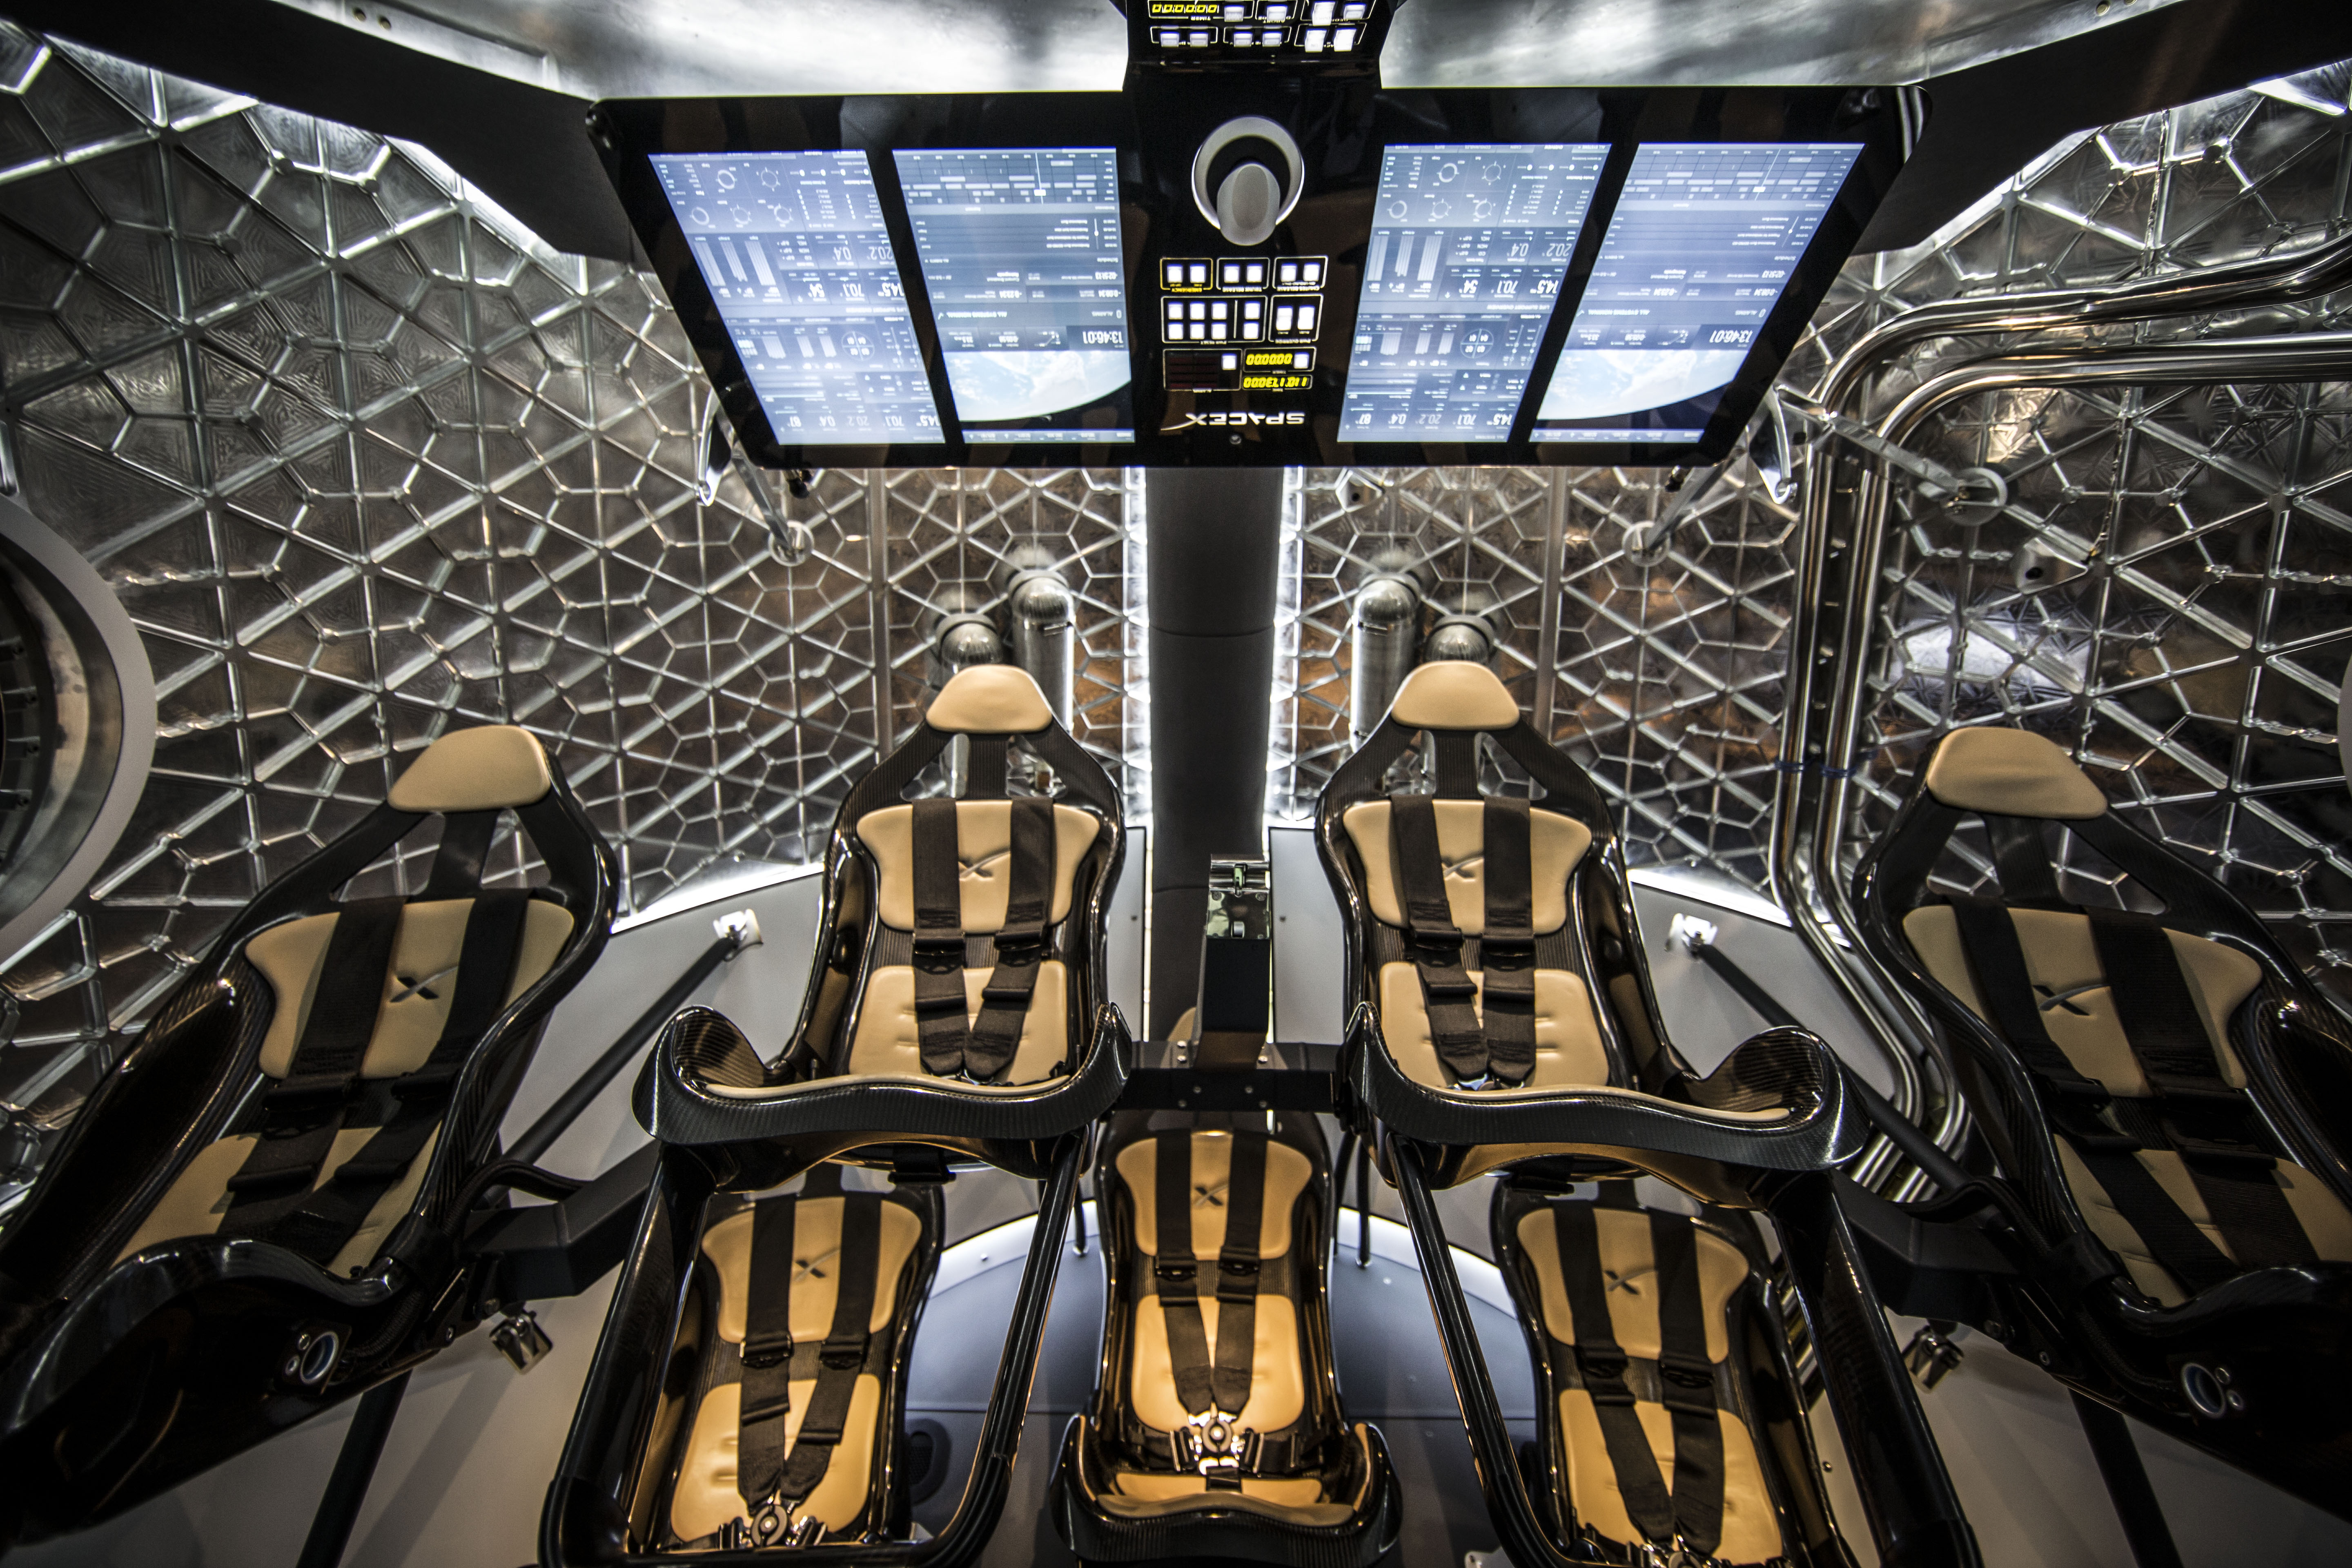 The interior design of the Dragon 2 spacecraft. Image: Space X